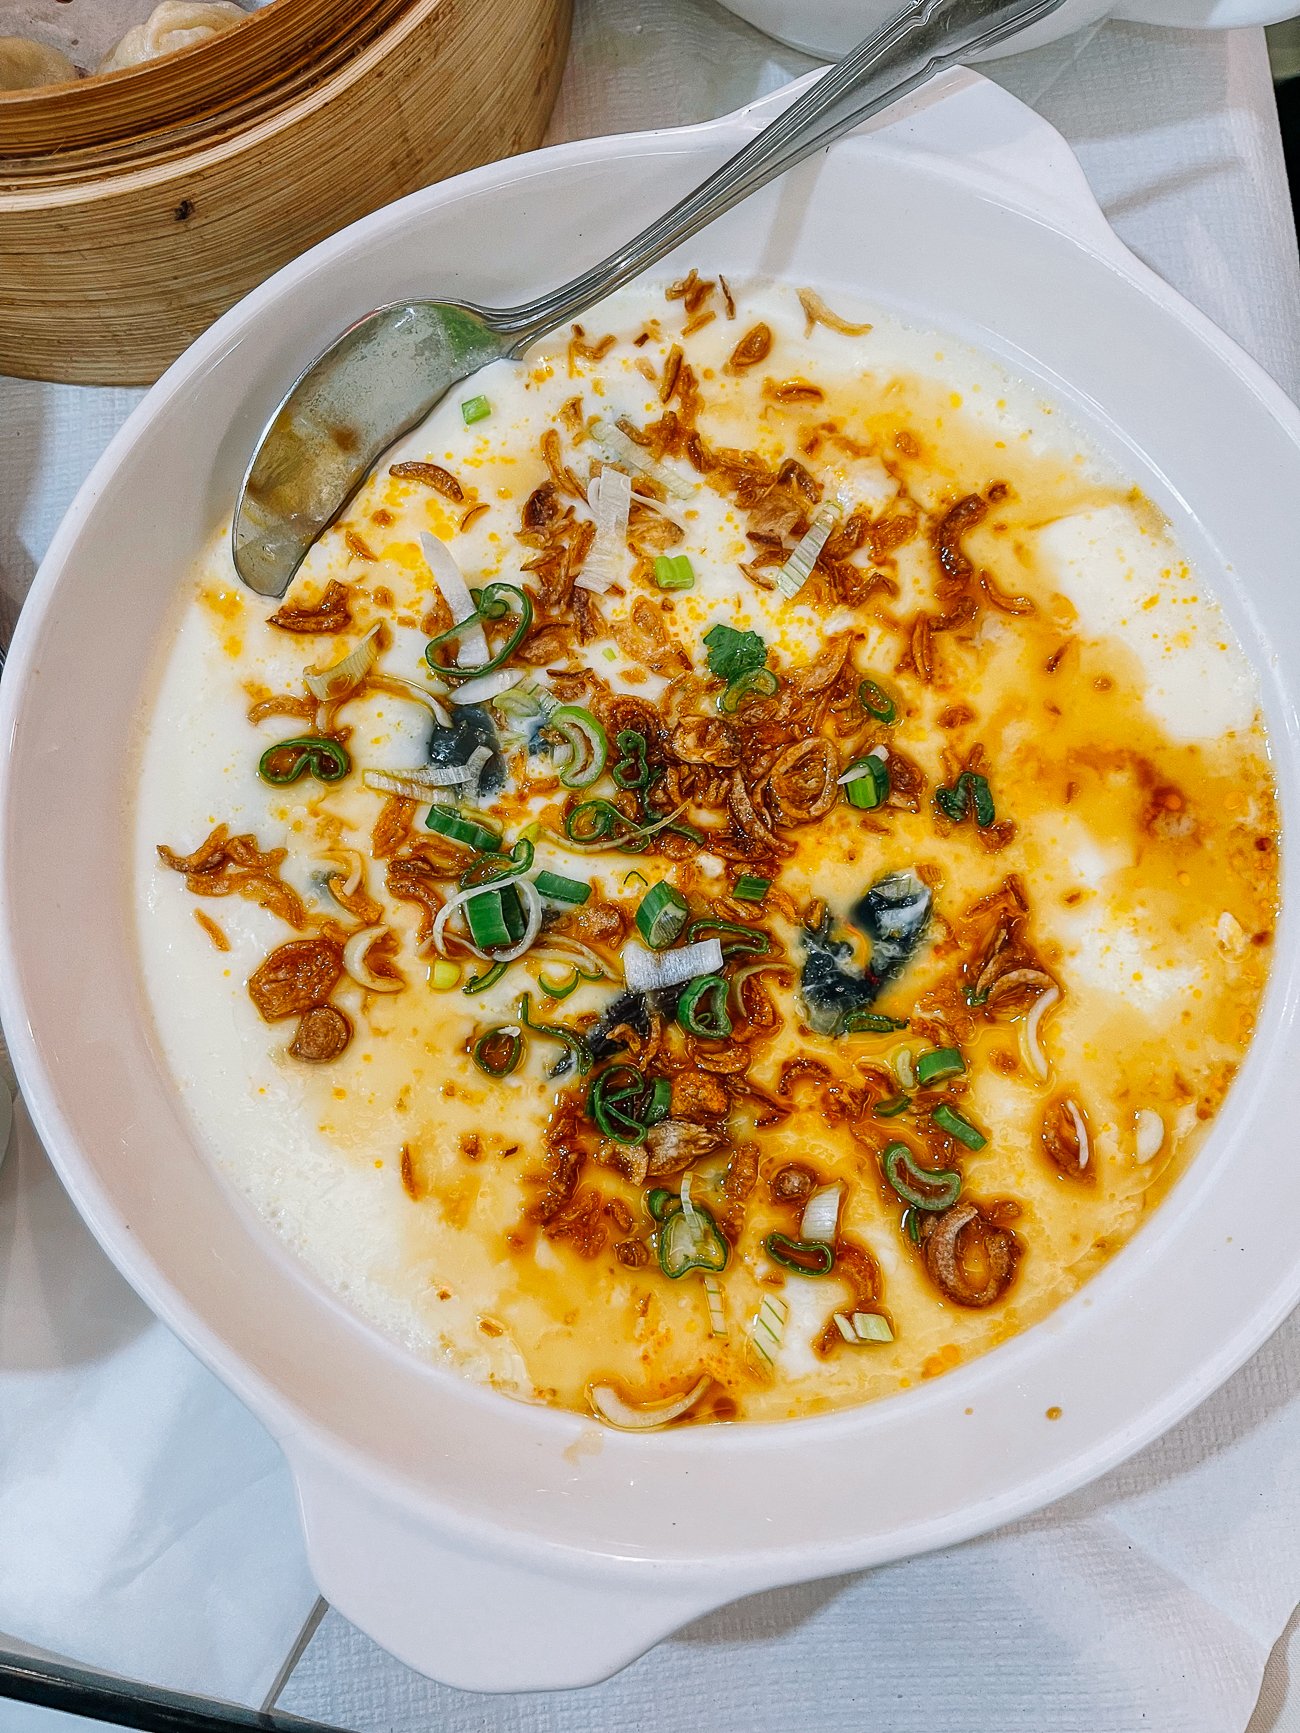 Steamed egg with fried shallots, scallions, and light sauce poured over